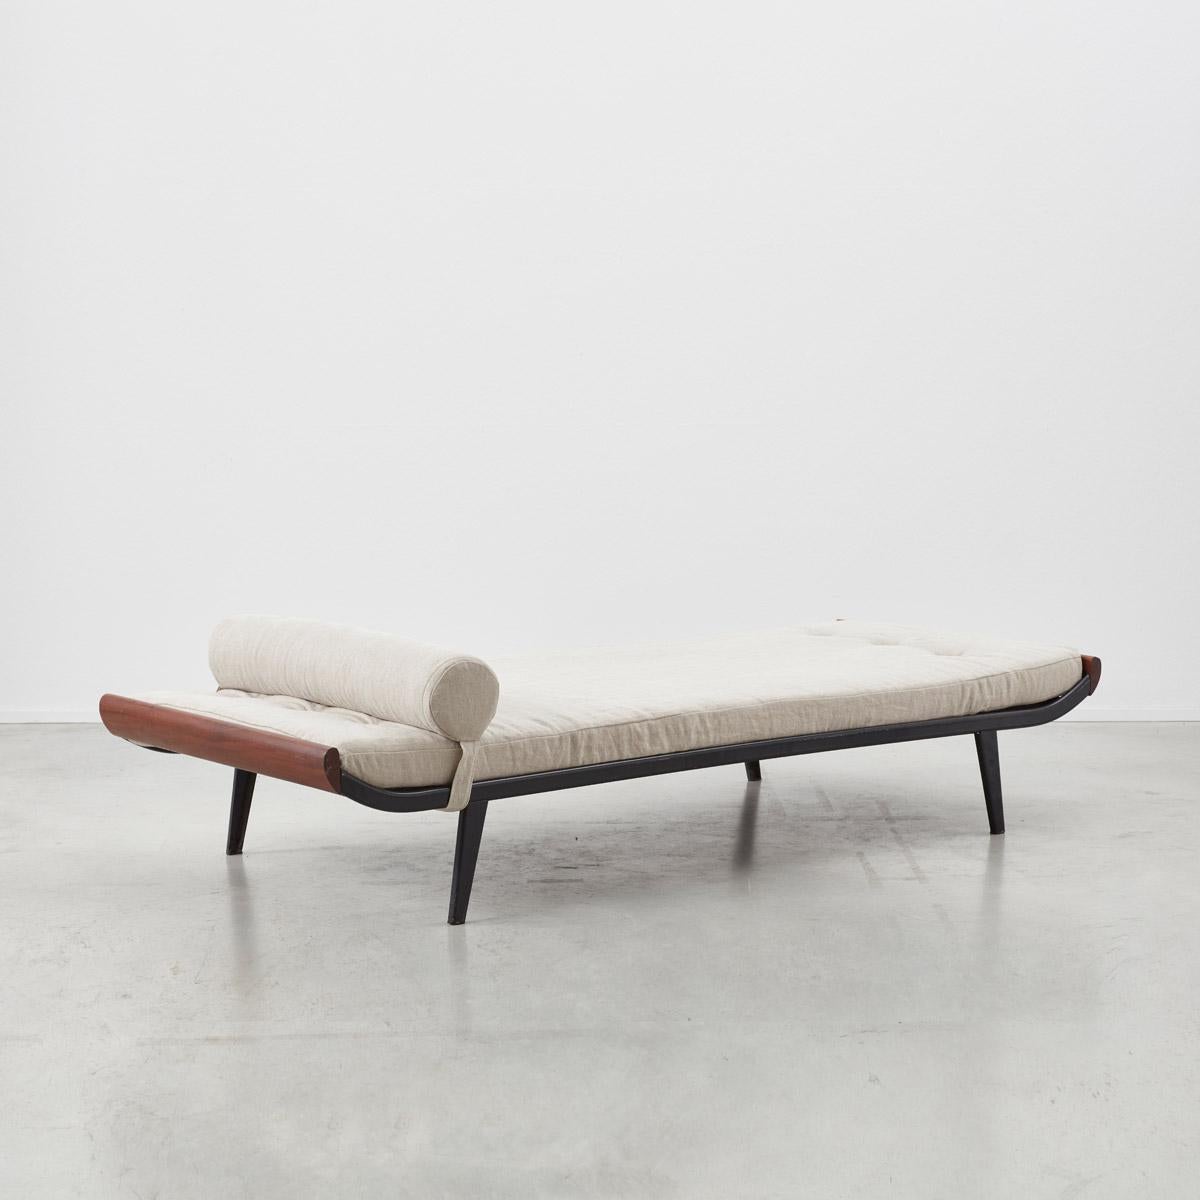 This Minimalist ‘Cleopatra’ daybed was designed by Dutch designer, Dick Cordemeijer, for Auping. Minimalist clean lines. Metal frame with mattress and a pleasing bolster with detachable strap. Legs unscrew for easy install. We can usually source